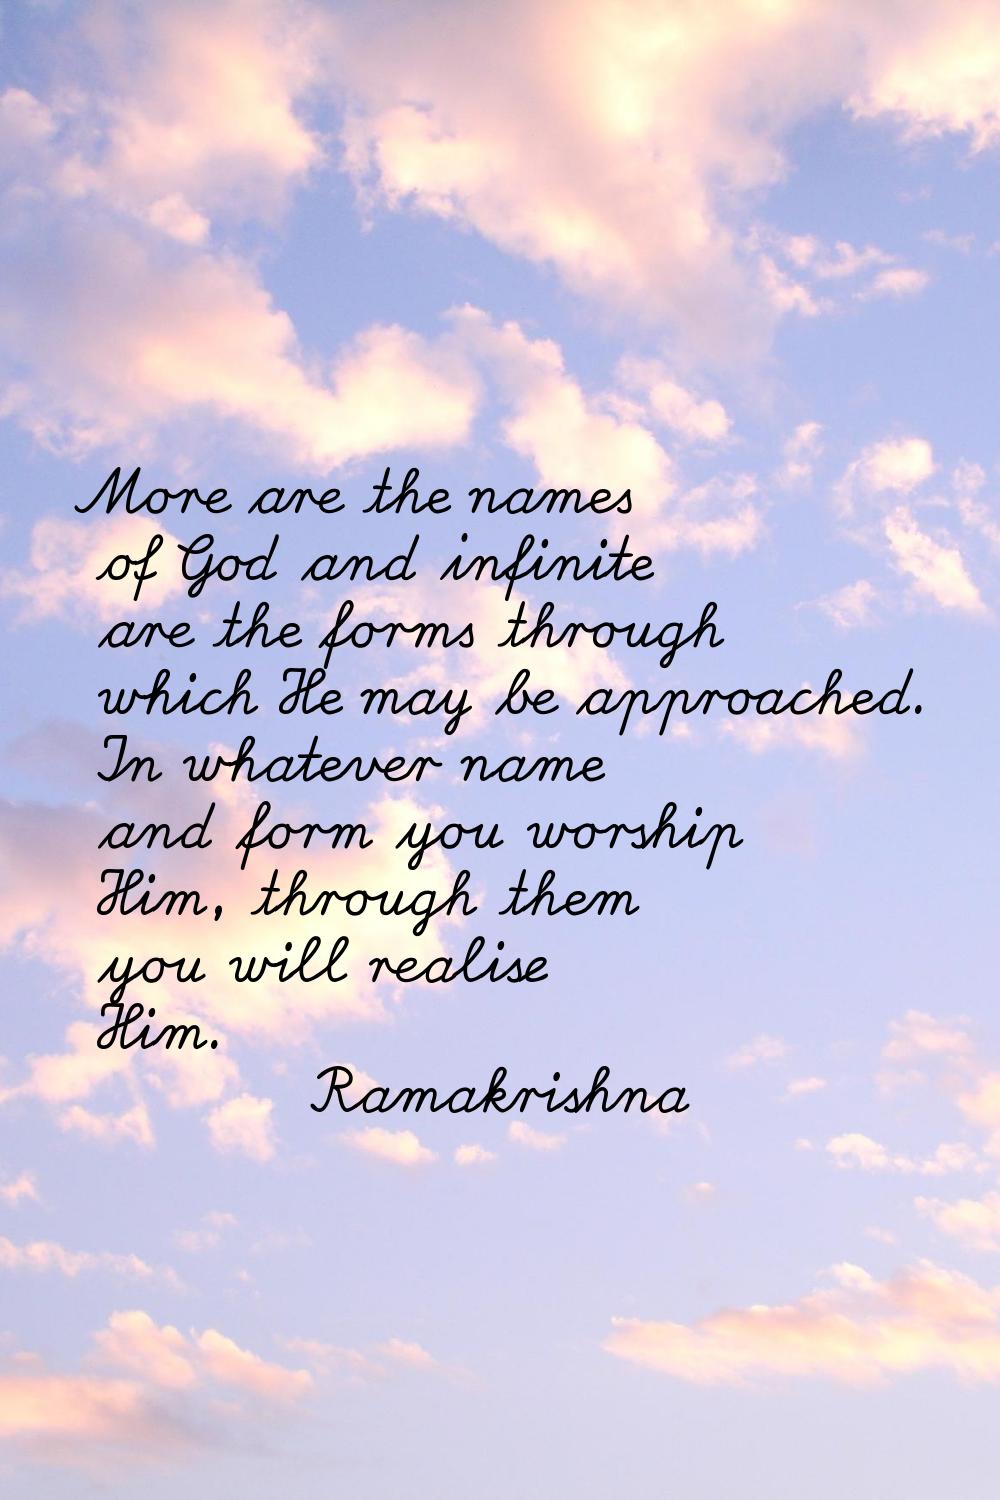 More are the names of God and infinite are the forms through which He may be approached. In whateve